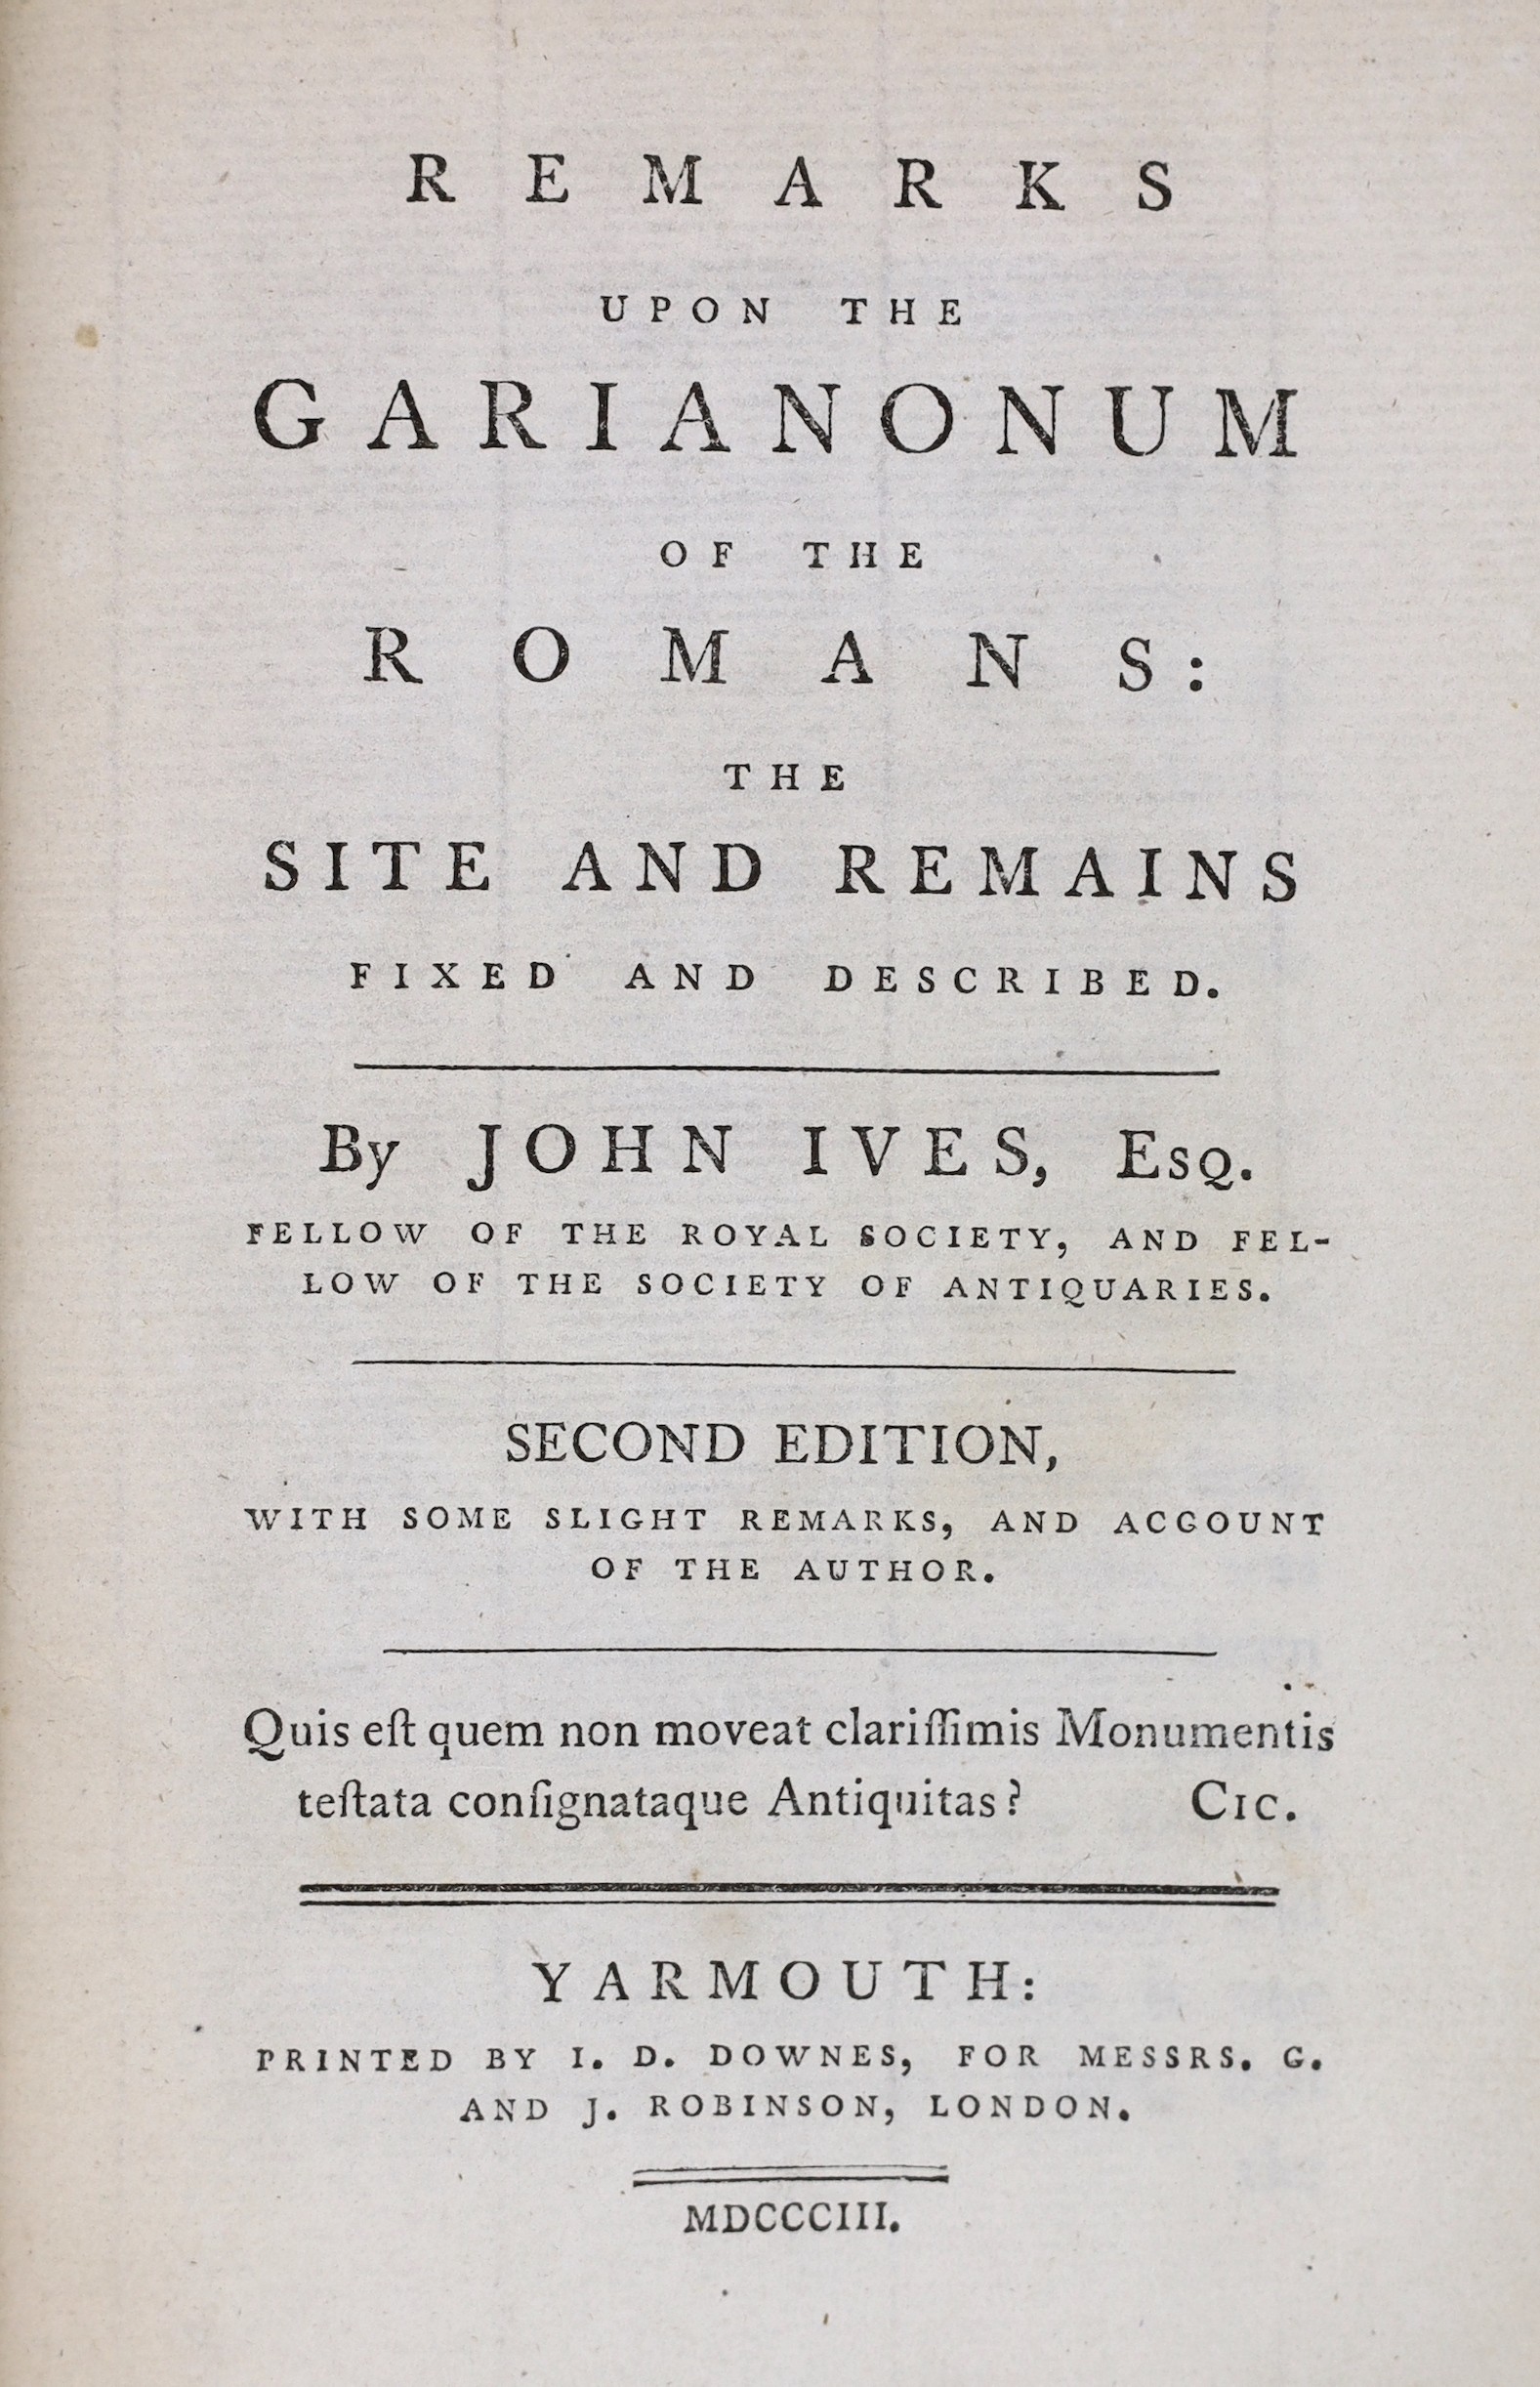 SUFFOLK: Ives, John - Remarks upon the Garianonum of the Romans: the site and remains fixed and described. 2nd edition, with some slight remarks, and account of the author. portrait frontis., folded map and 2 plans, fold